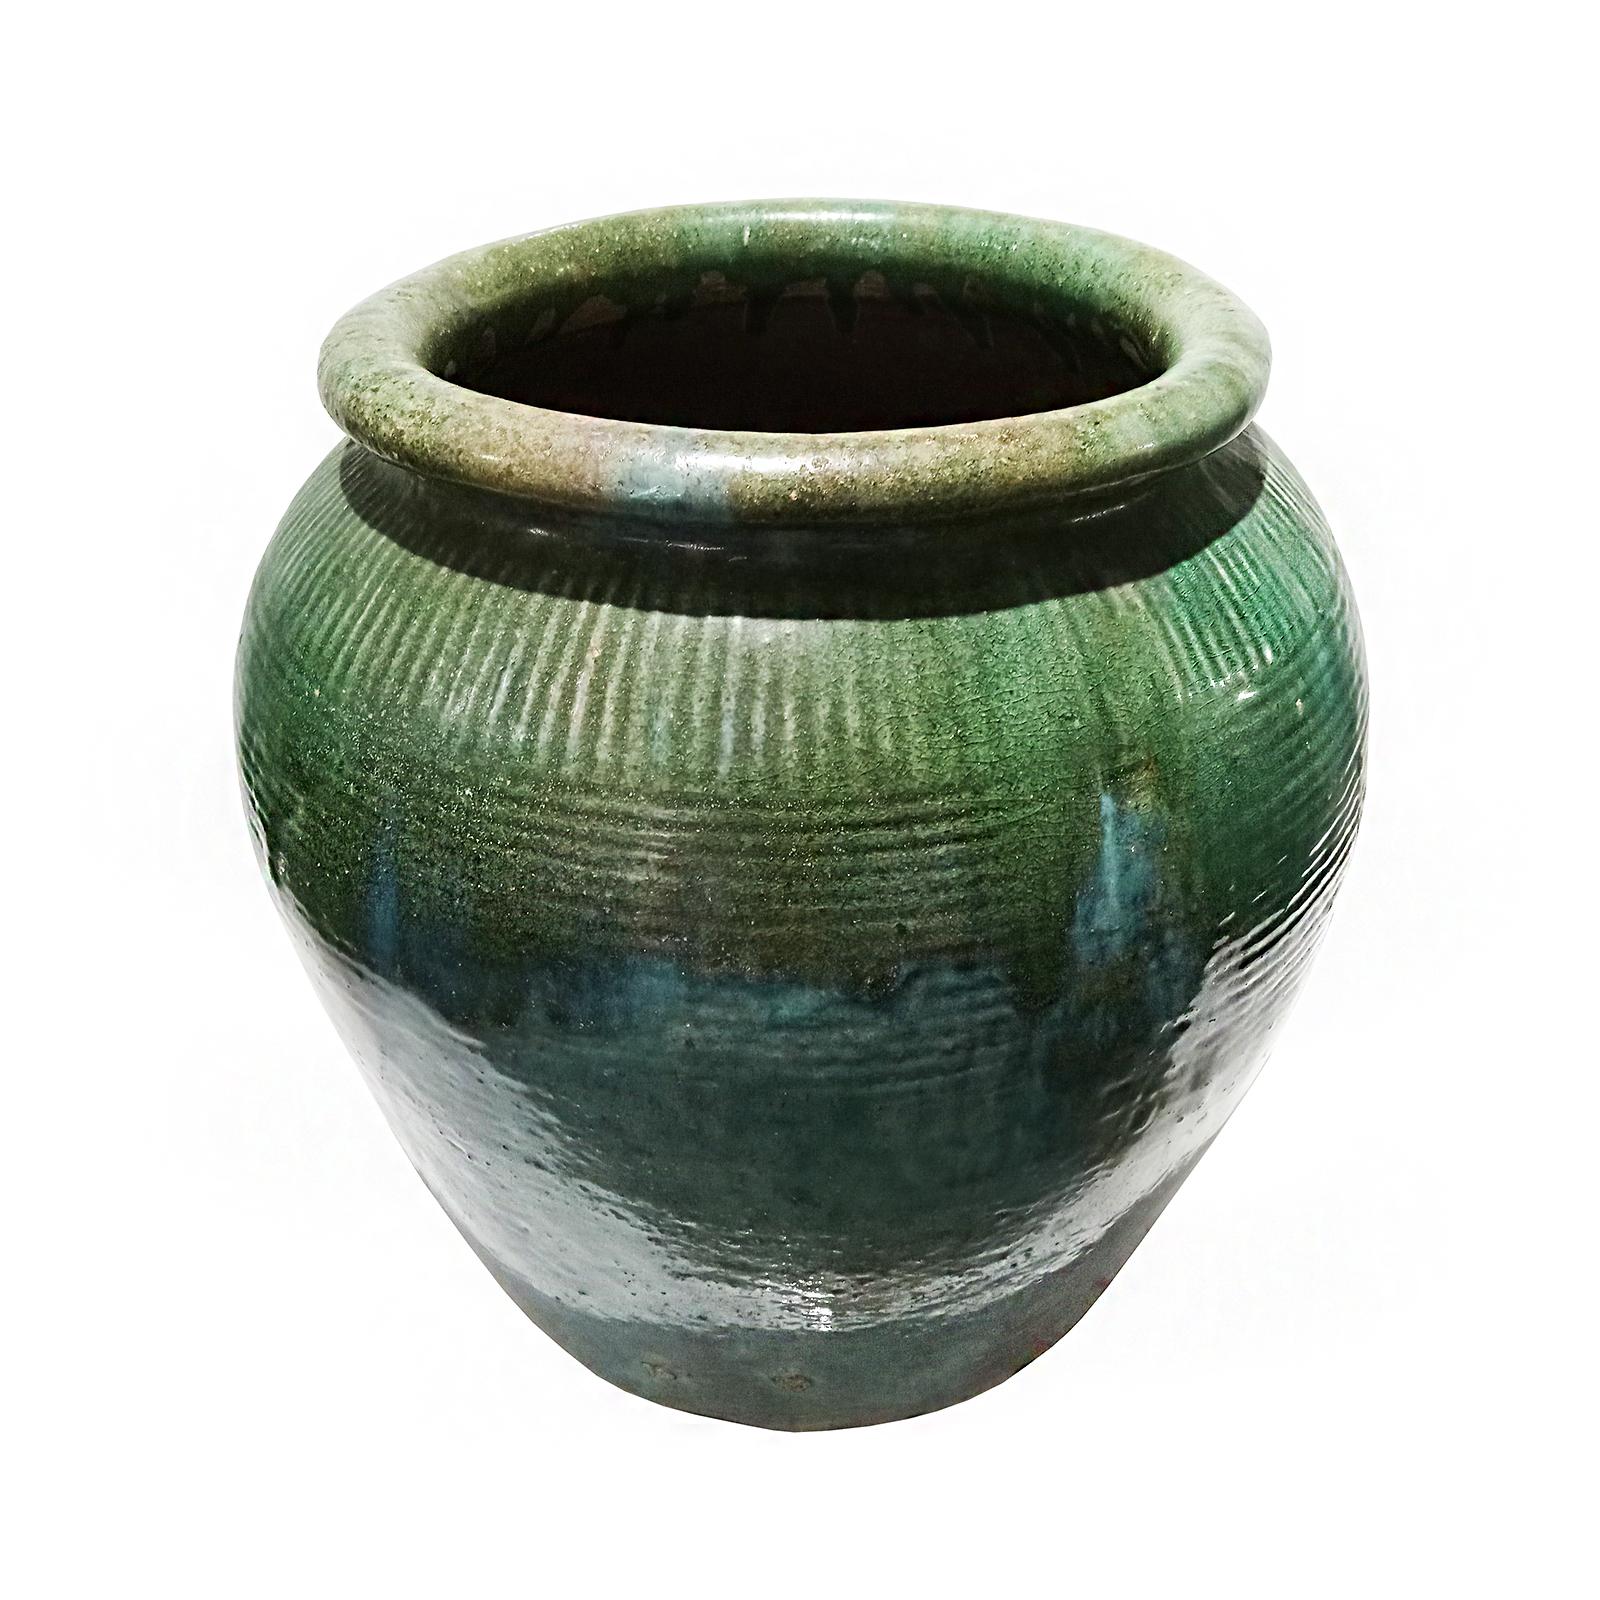 Balinese Terracotta Vase / Jar / Urn with Green Glaze, Contemporary For Sale 3